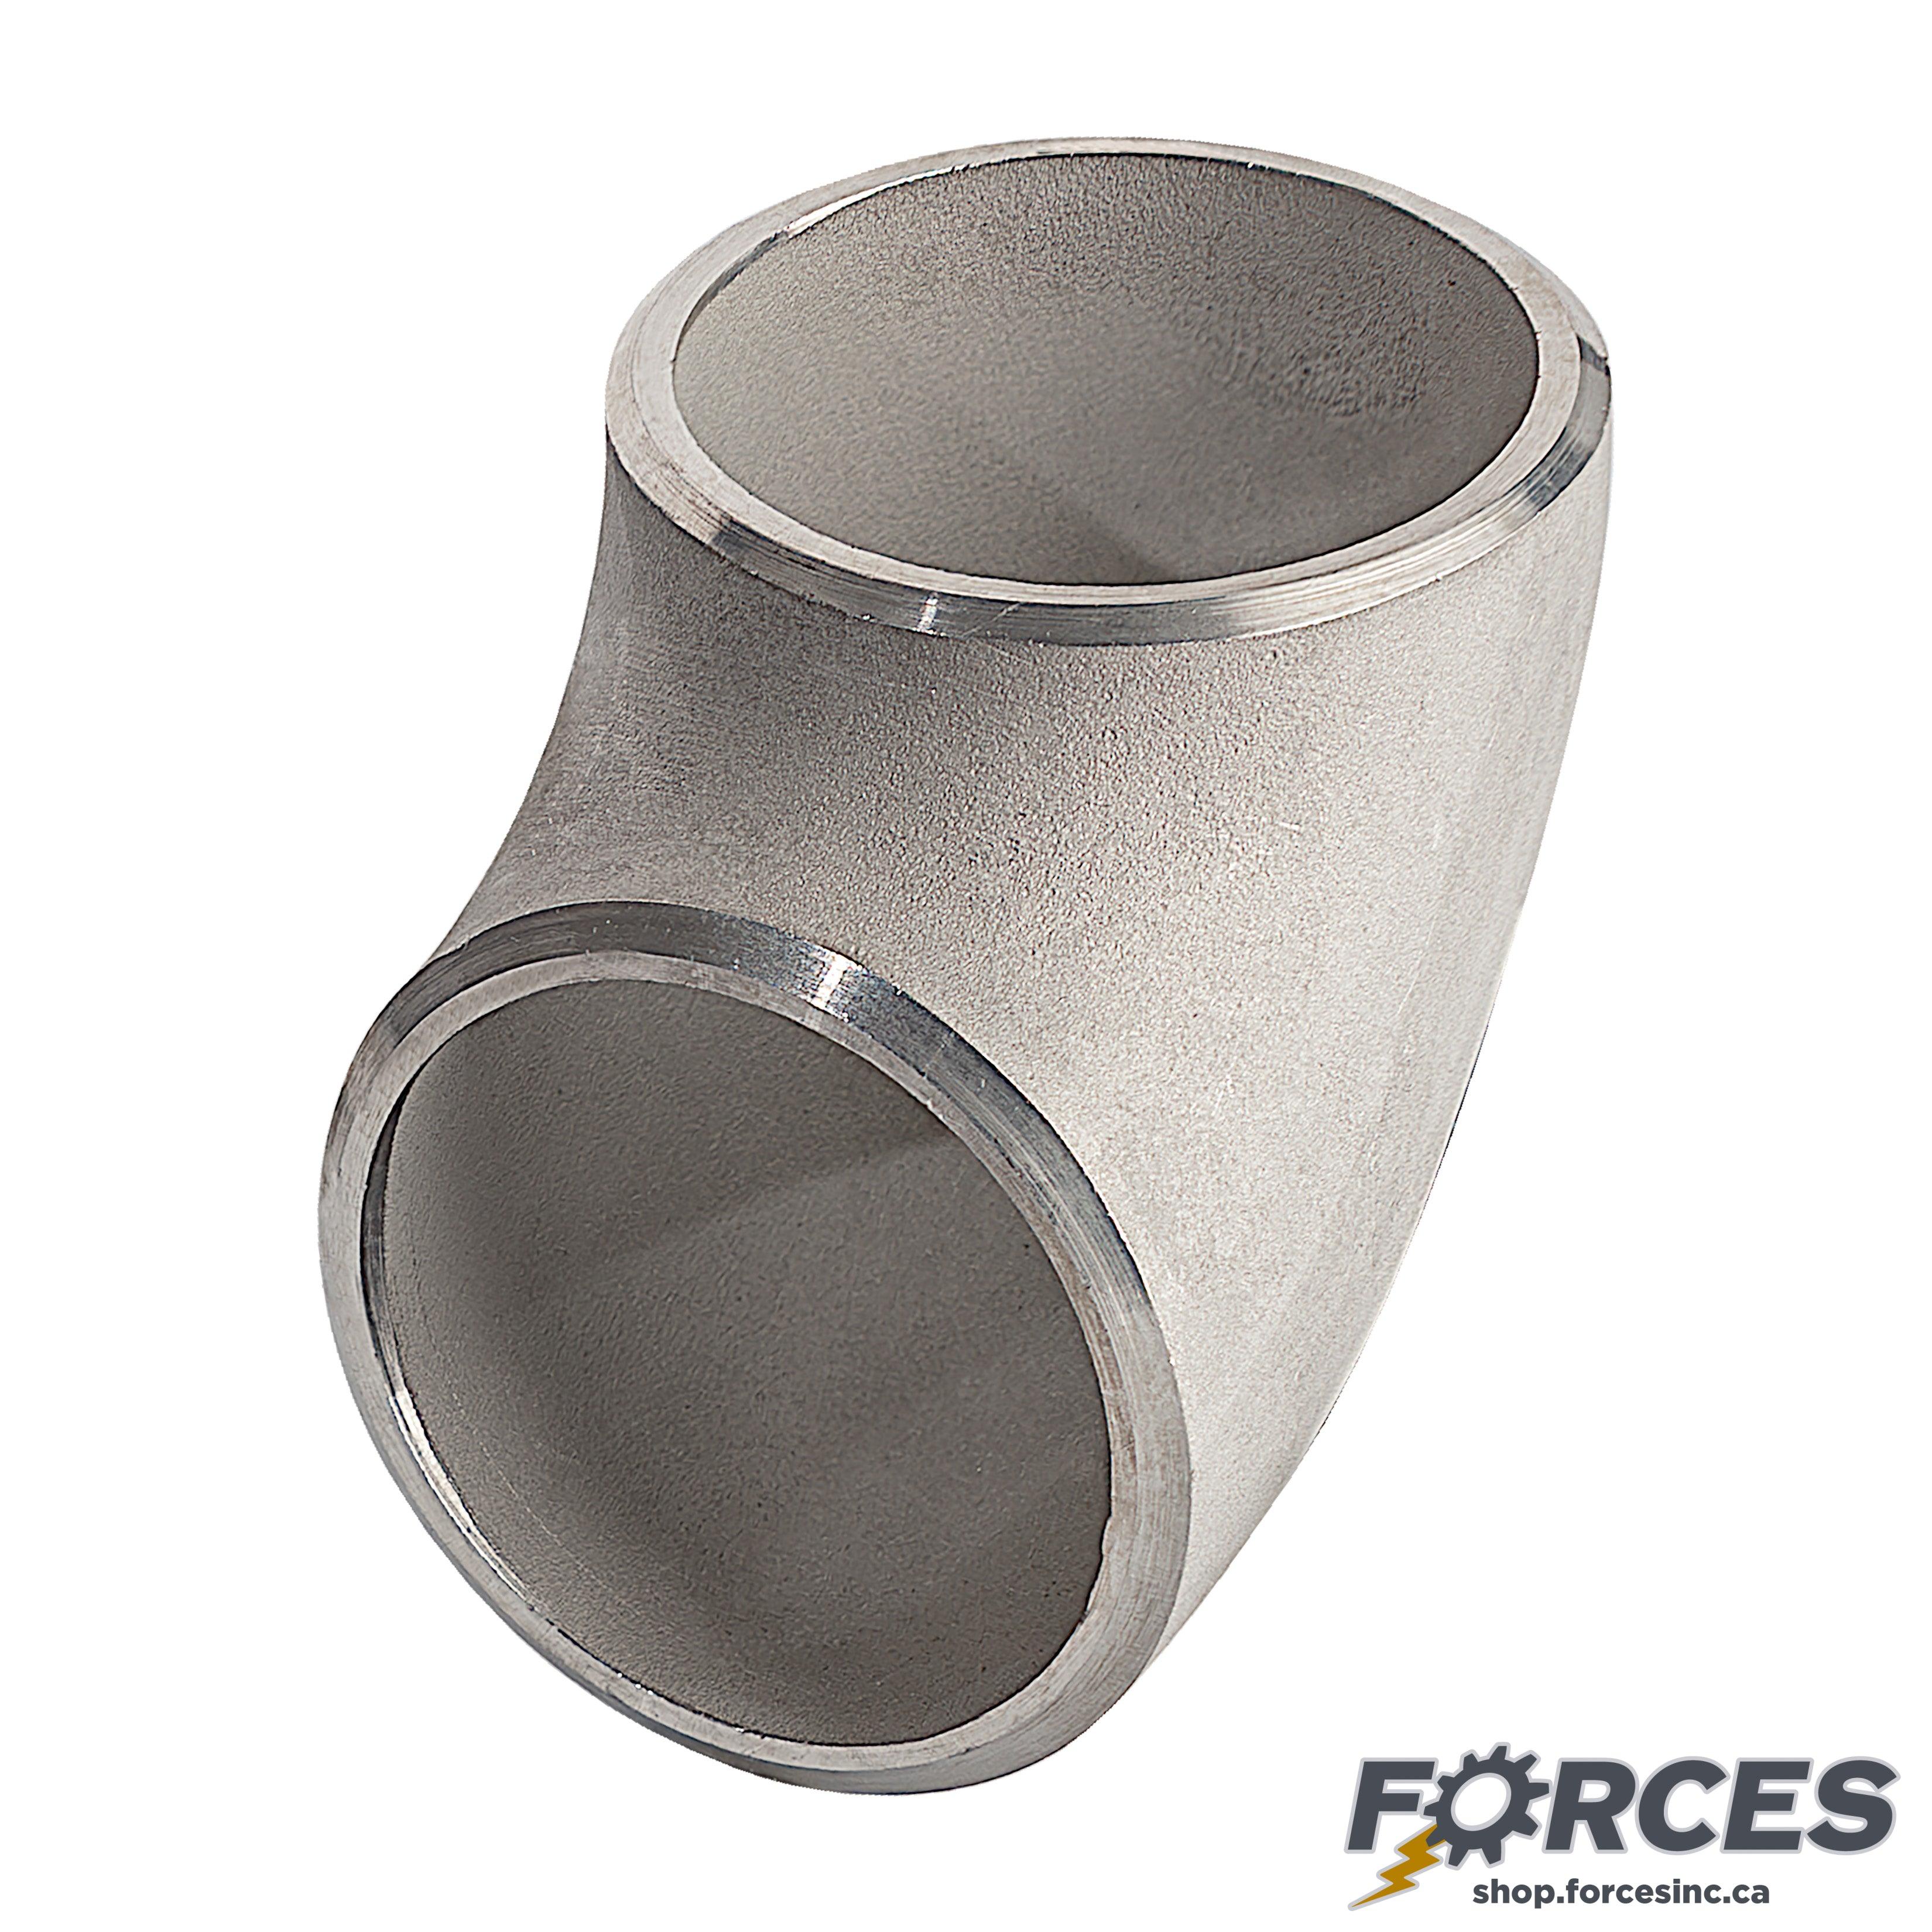 3/4" Elbow 45° SCH 10 Butt Weld - Stainless Steel 304 - Forces Inc